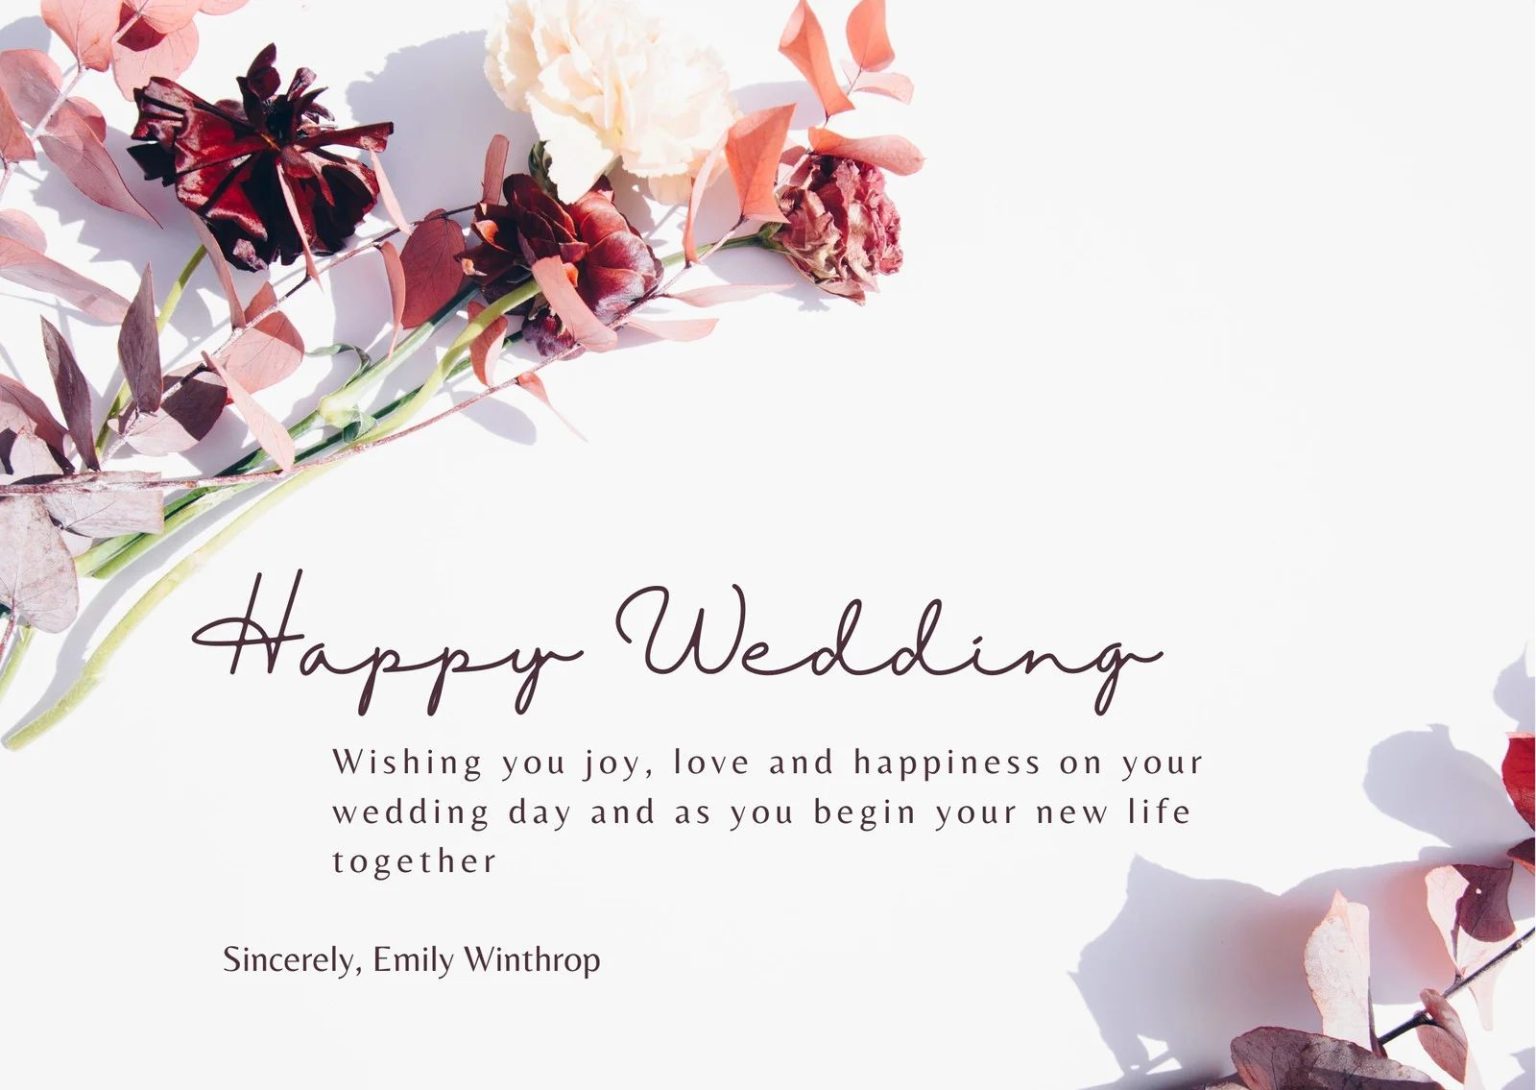 150+ Wedding Wishes: What To Write In A Wedding Card [Examples & Tips]